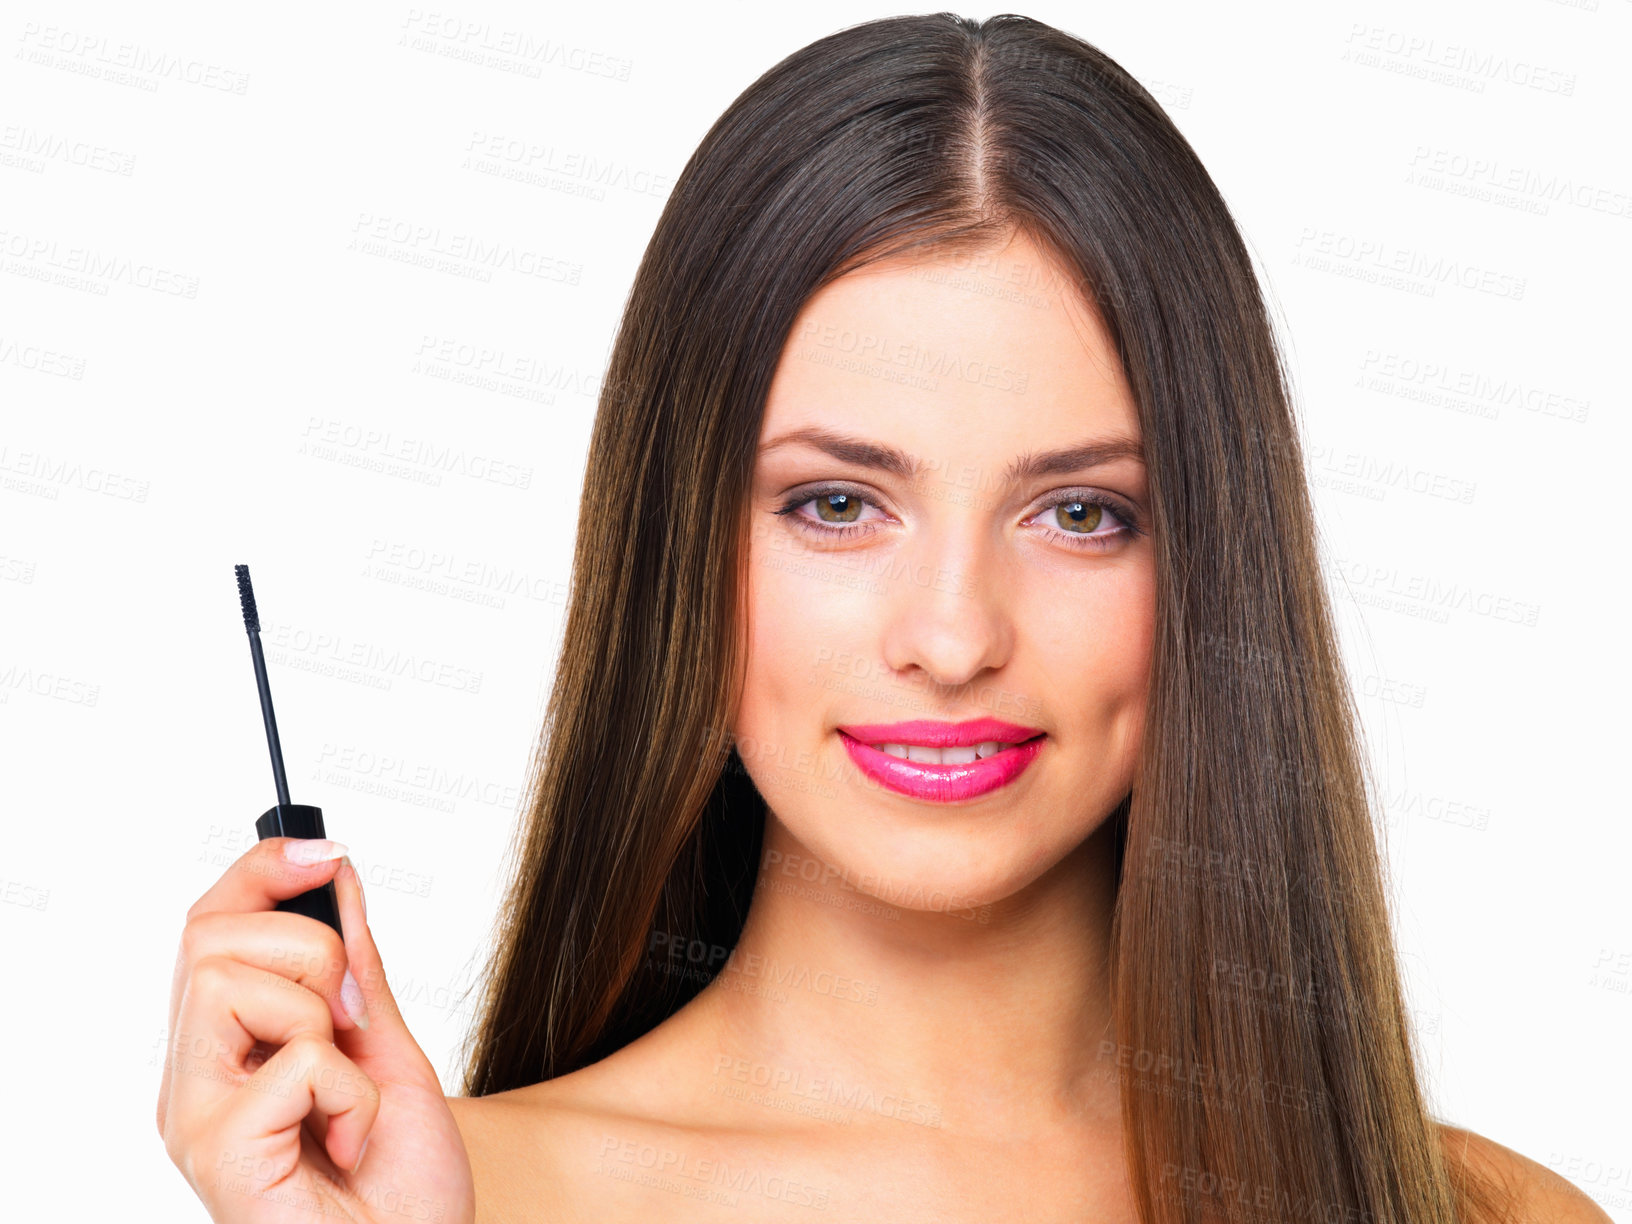 Buy stock photo Studio portrait of a beautiful young woman holding a mascara wand against a white background